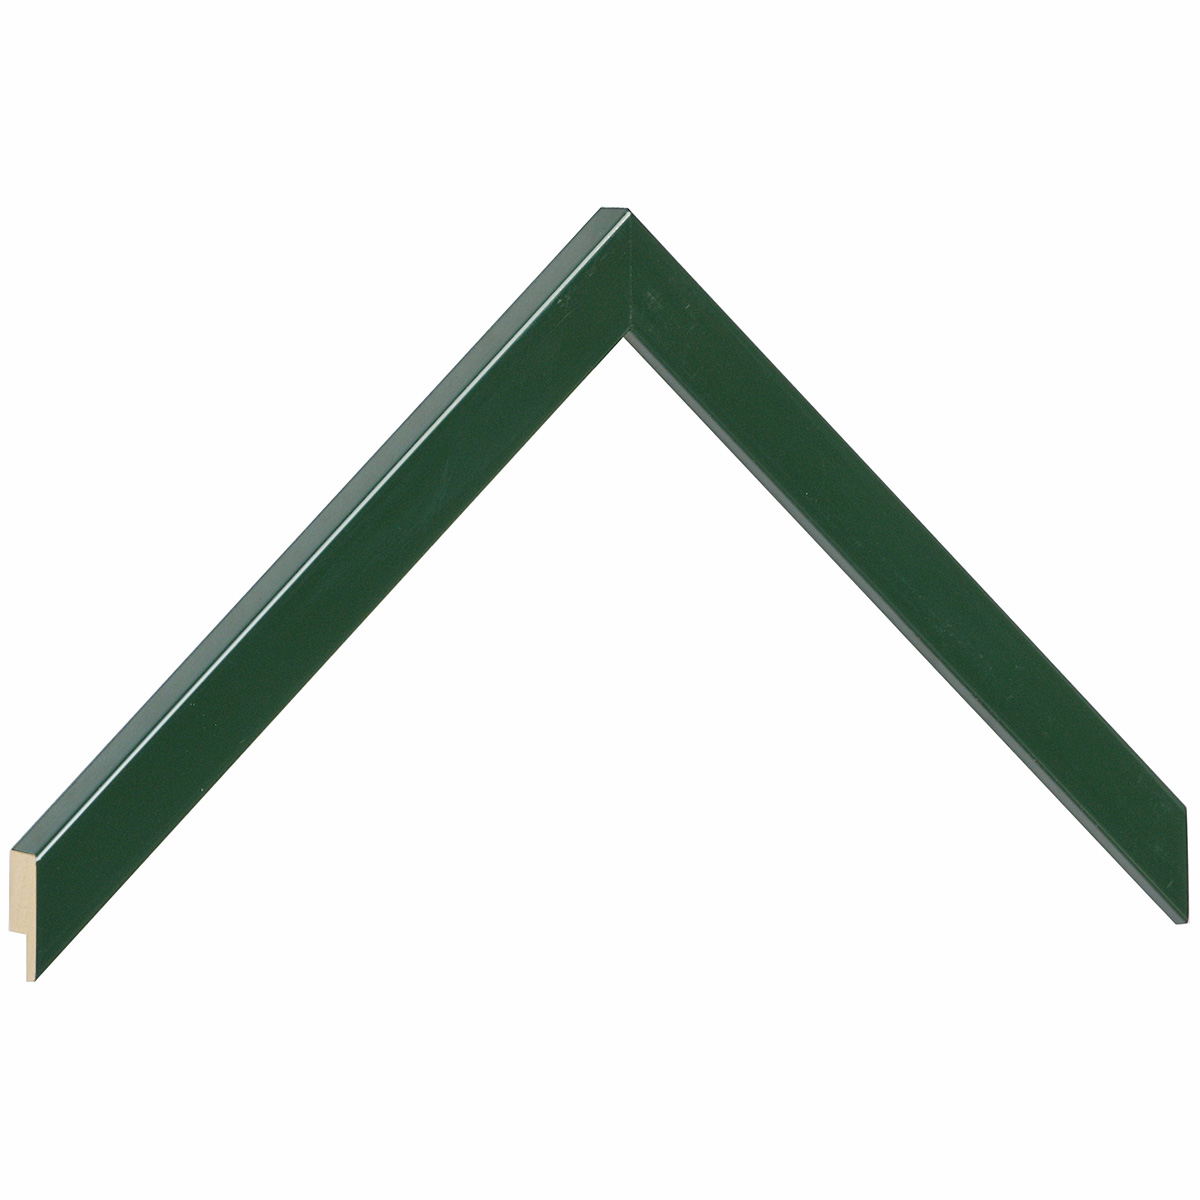 Moulding ayous - width 15mm height 14 - Glossy green - Sample